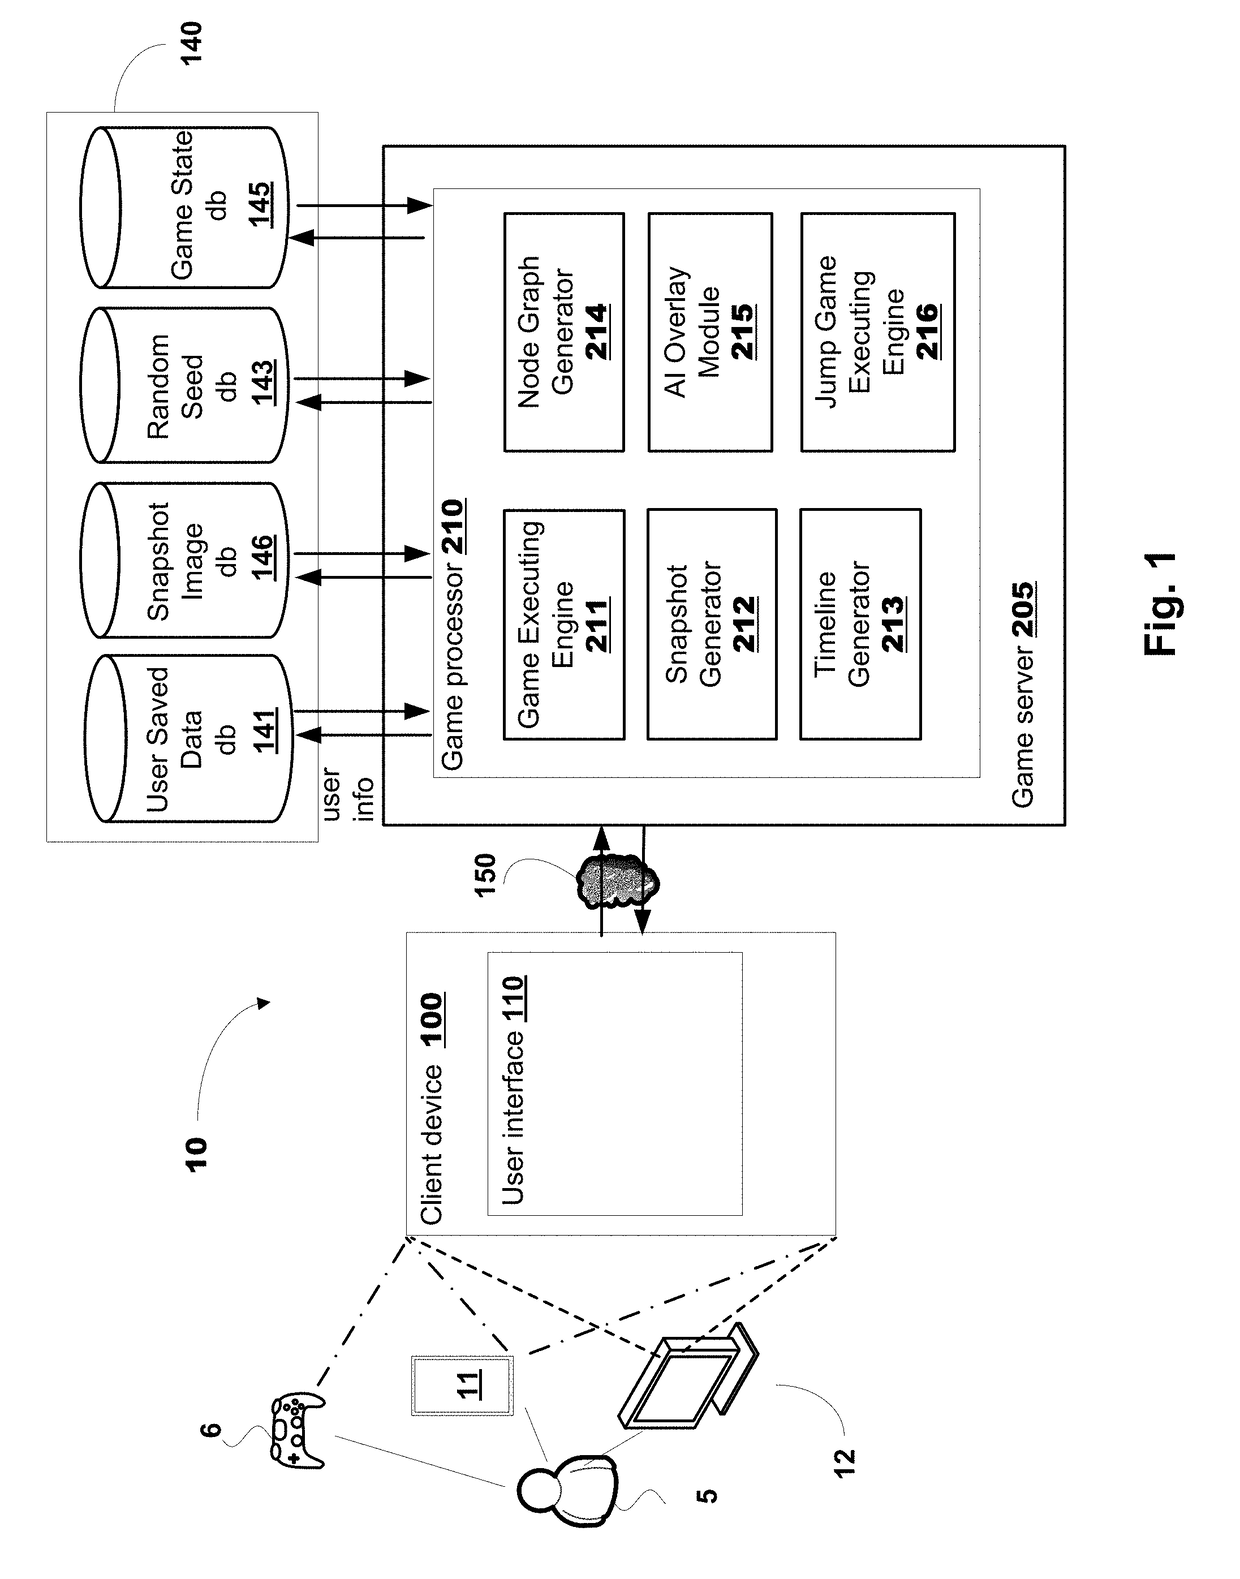 Method and system for accessing previously stored game play via video recording as executed on a game cloud system